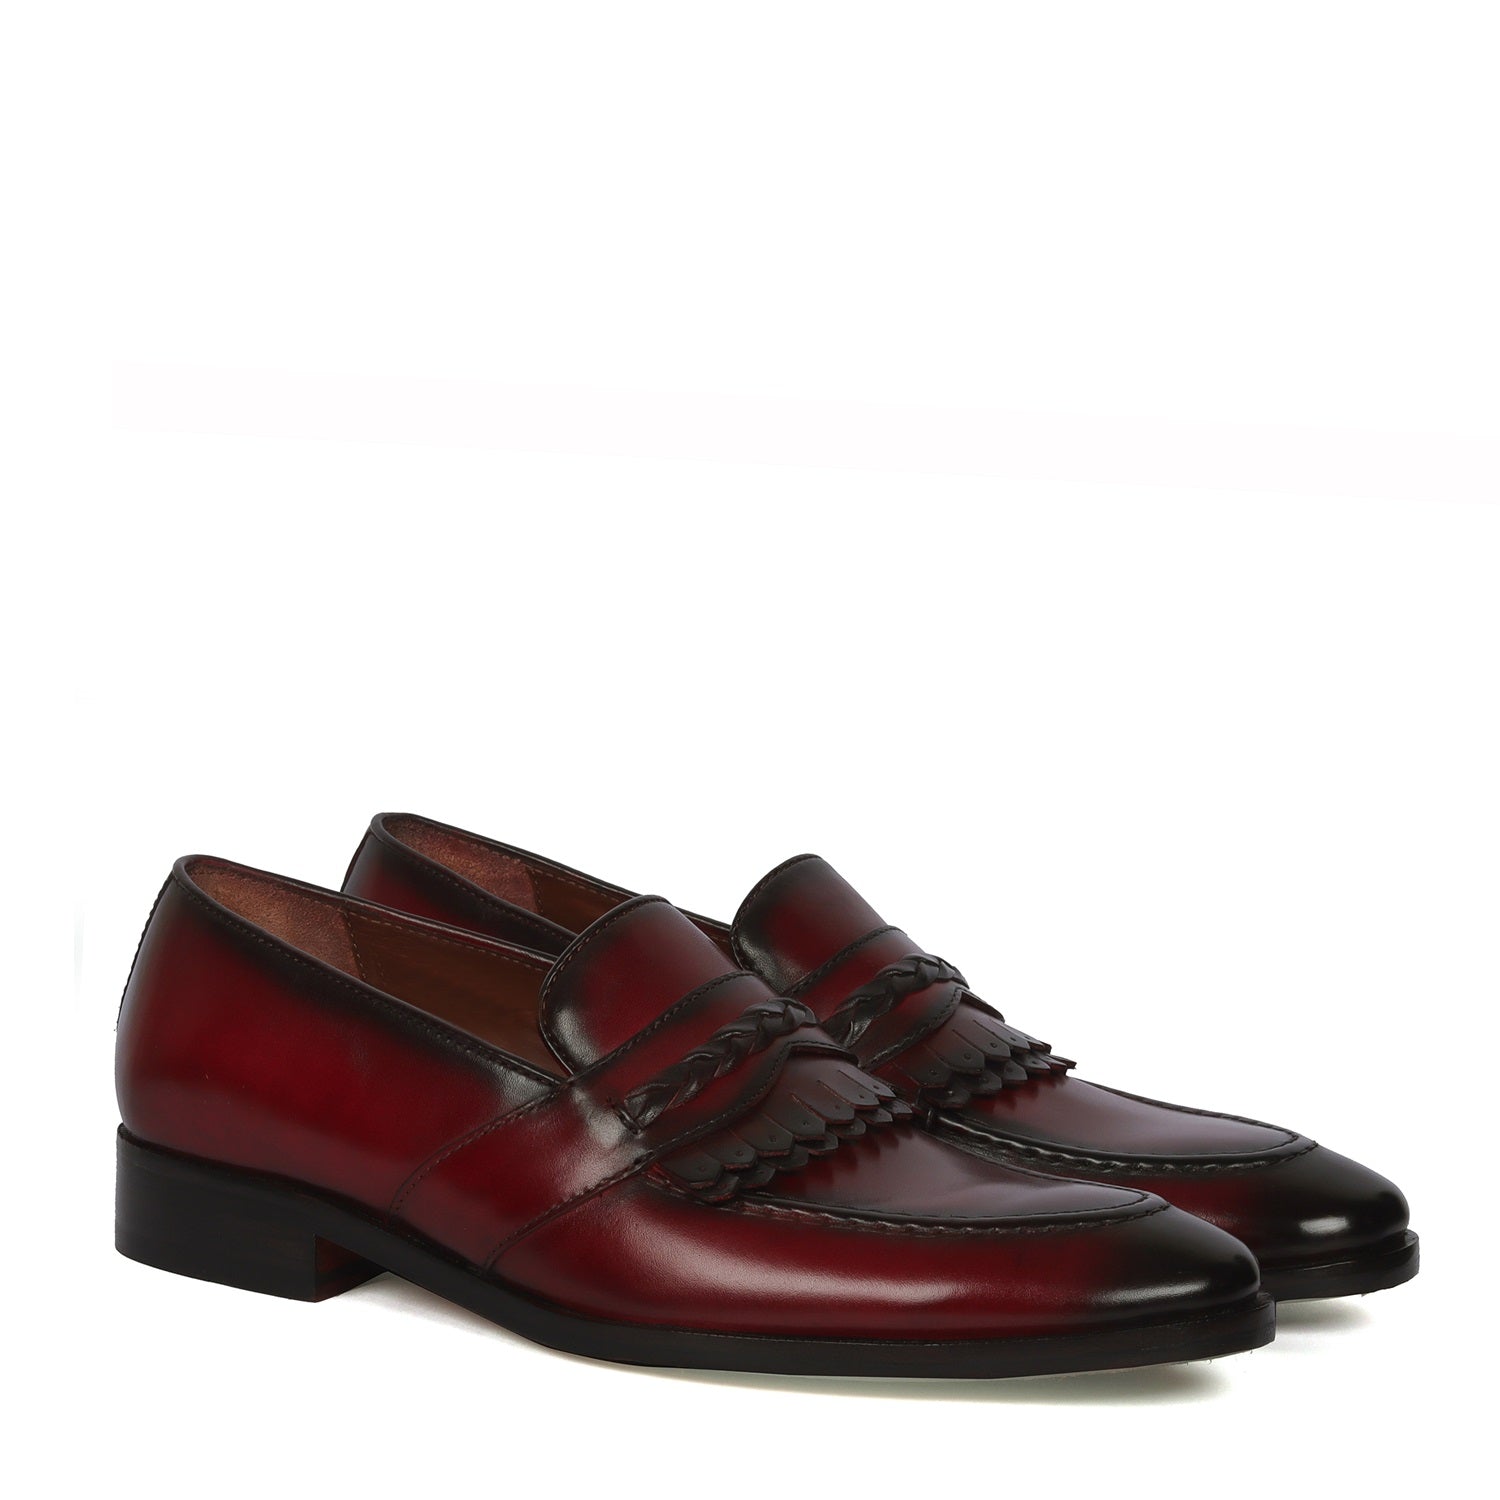 Wine Leather Slip-On Loafers with Dual Fringes Weaved Strip By Brune & Bareskin